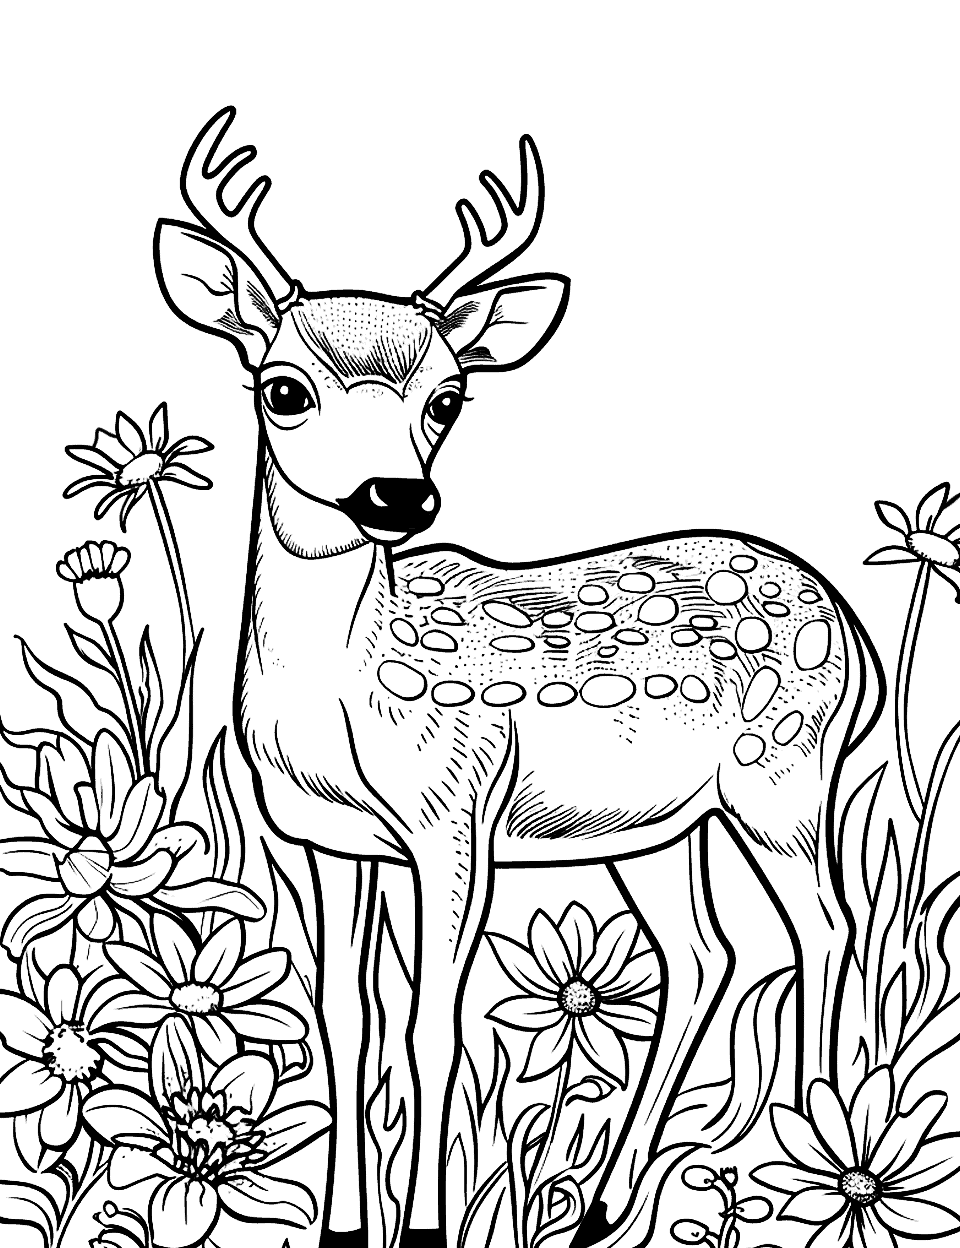 Deer Surrounded by Wildflowers Coloring Page - A peaceful scene of a deer surrounded by a variety of wildflowers.